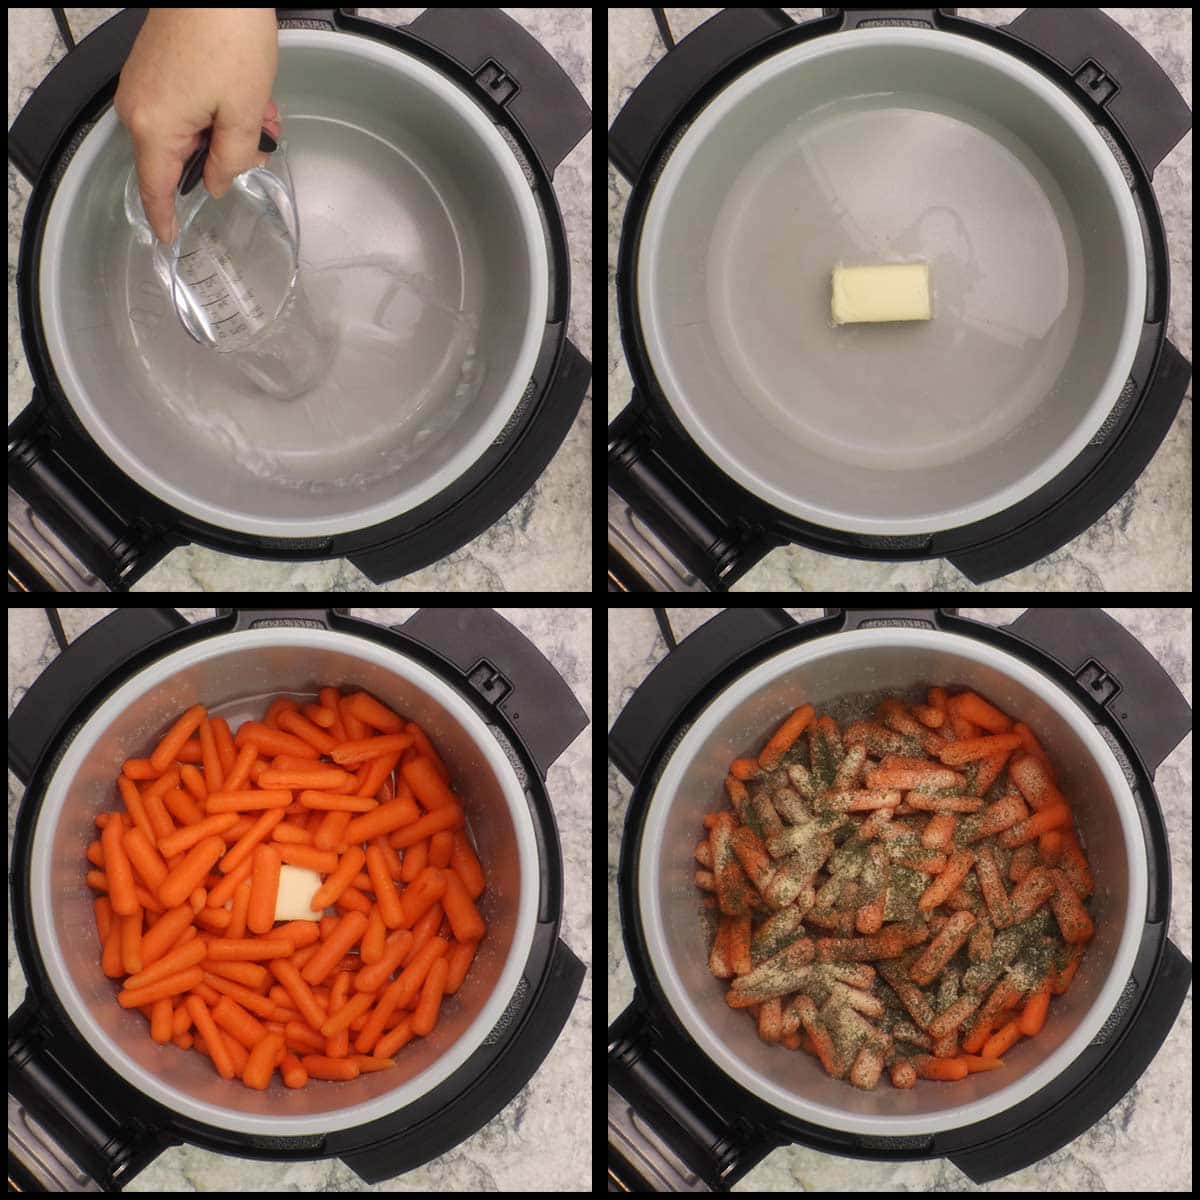 adding ingredients for dill carrots to the pressure cooker.